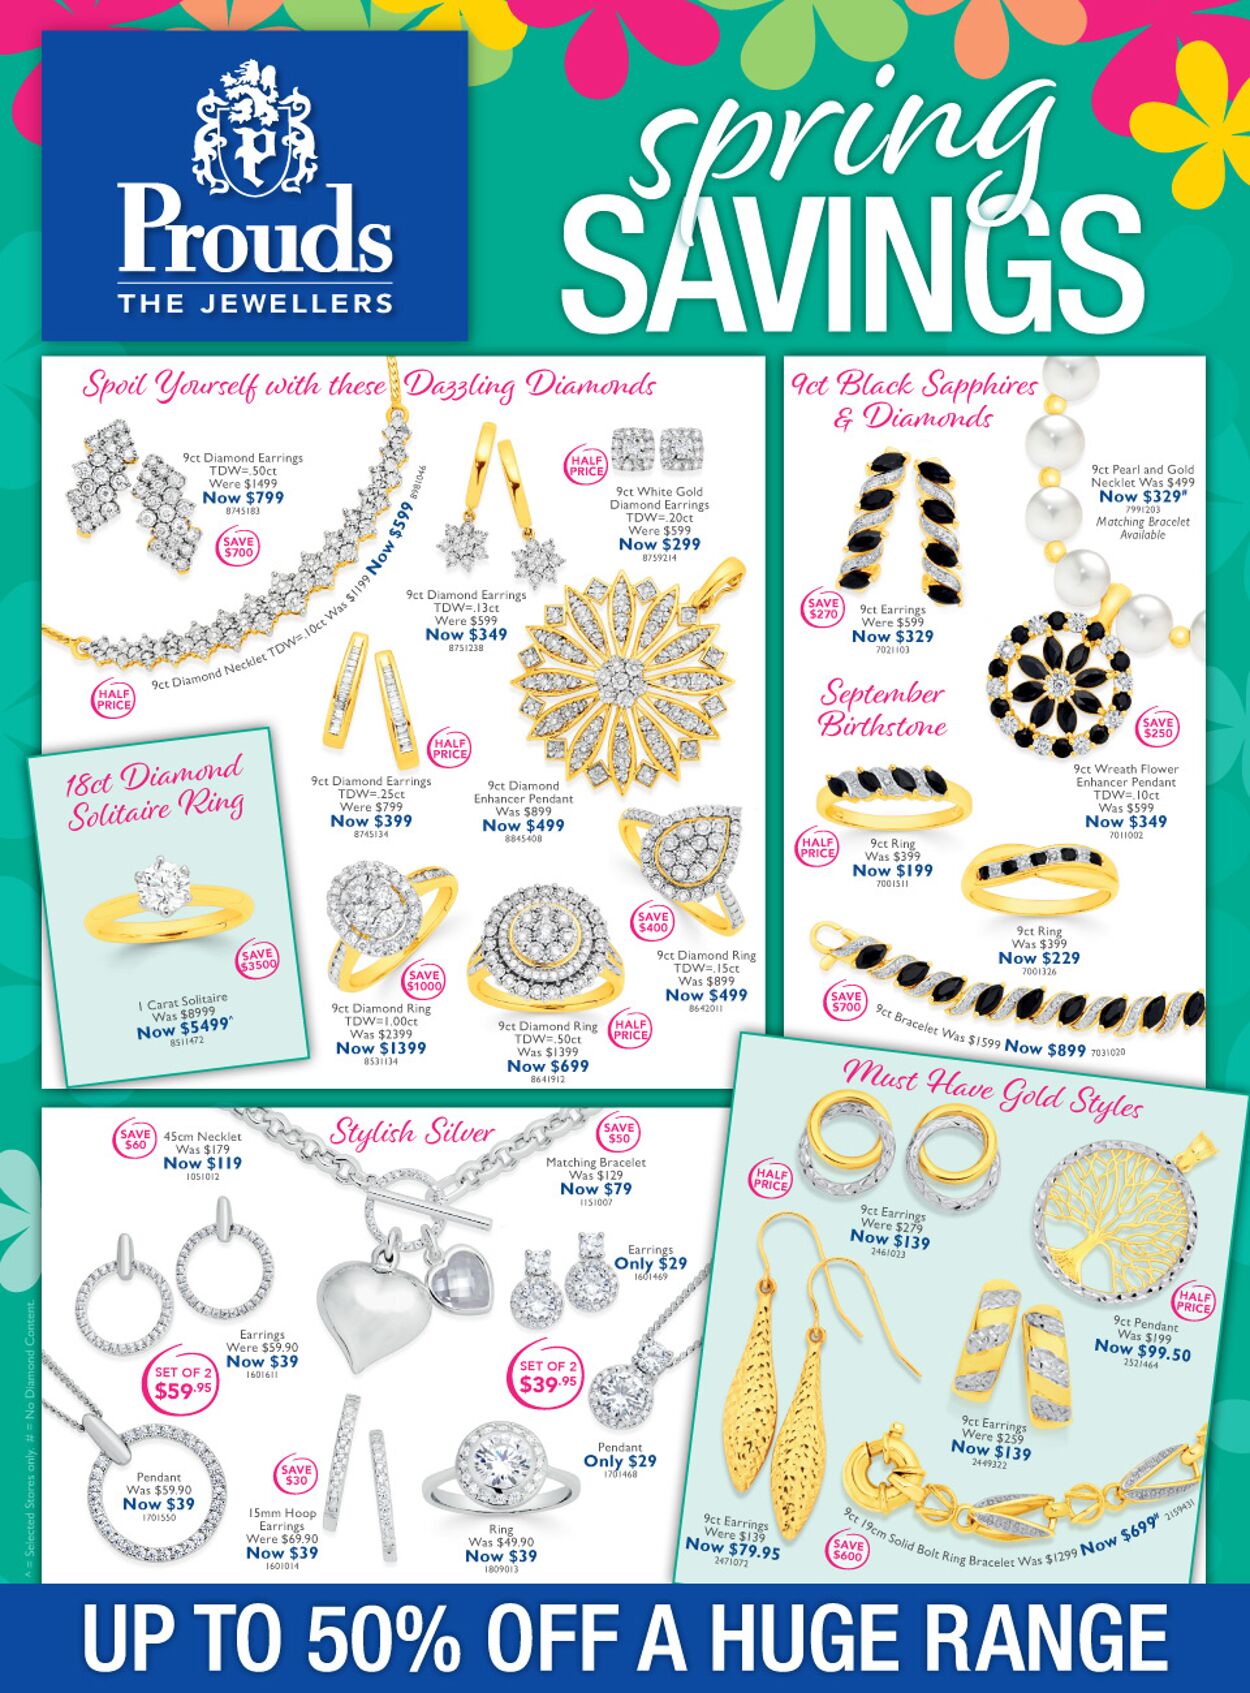 Produs The Jewellers Promotional catalogues